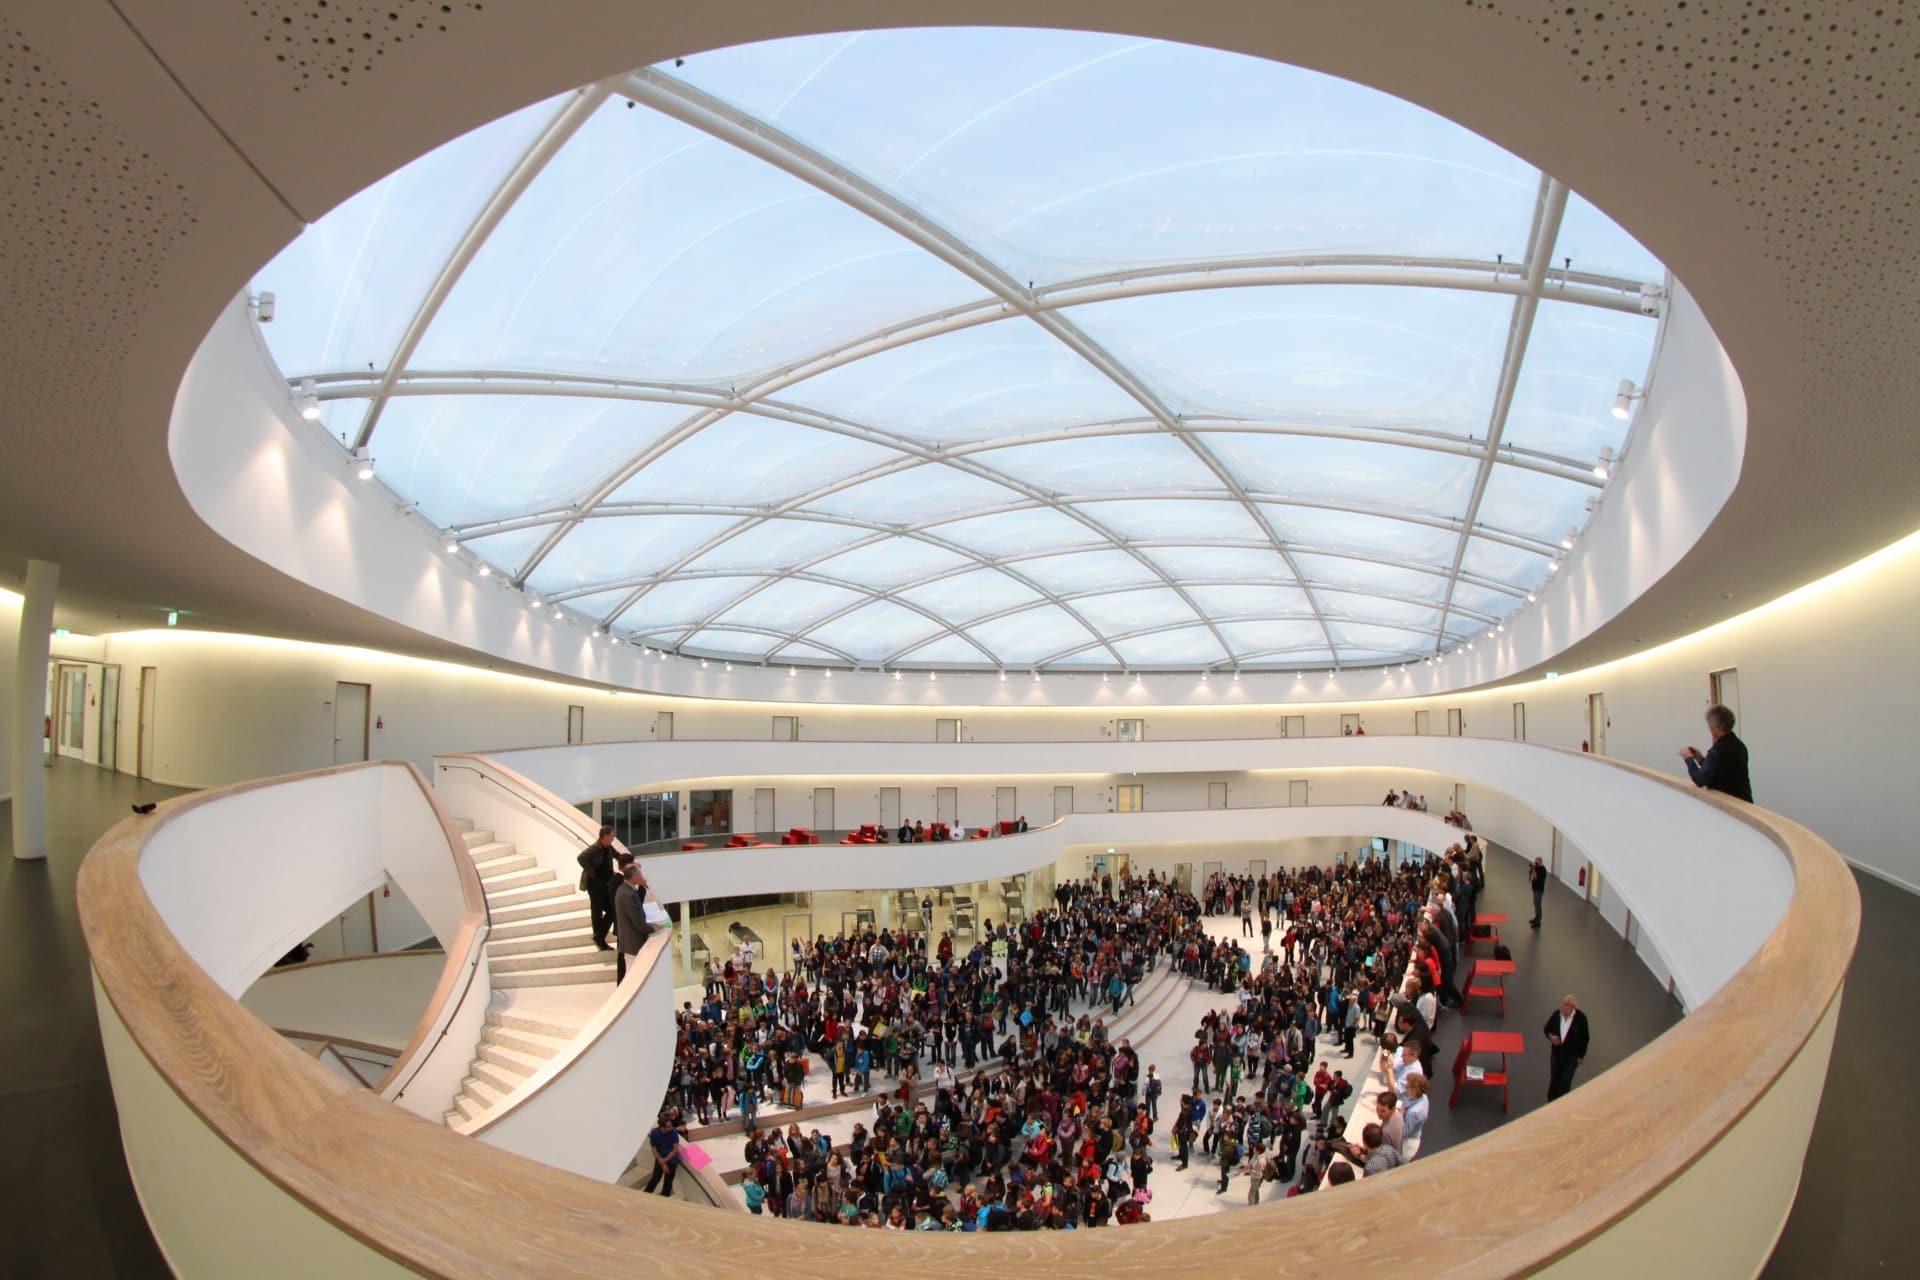 In 2012, Vector Foiltec was contracted to install a sustainable Texlon® ETFE roof over one of the school's atriums.